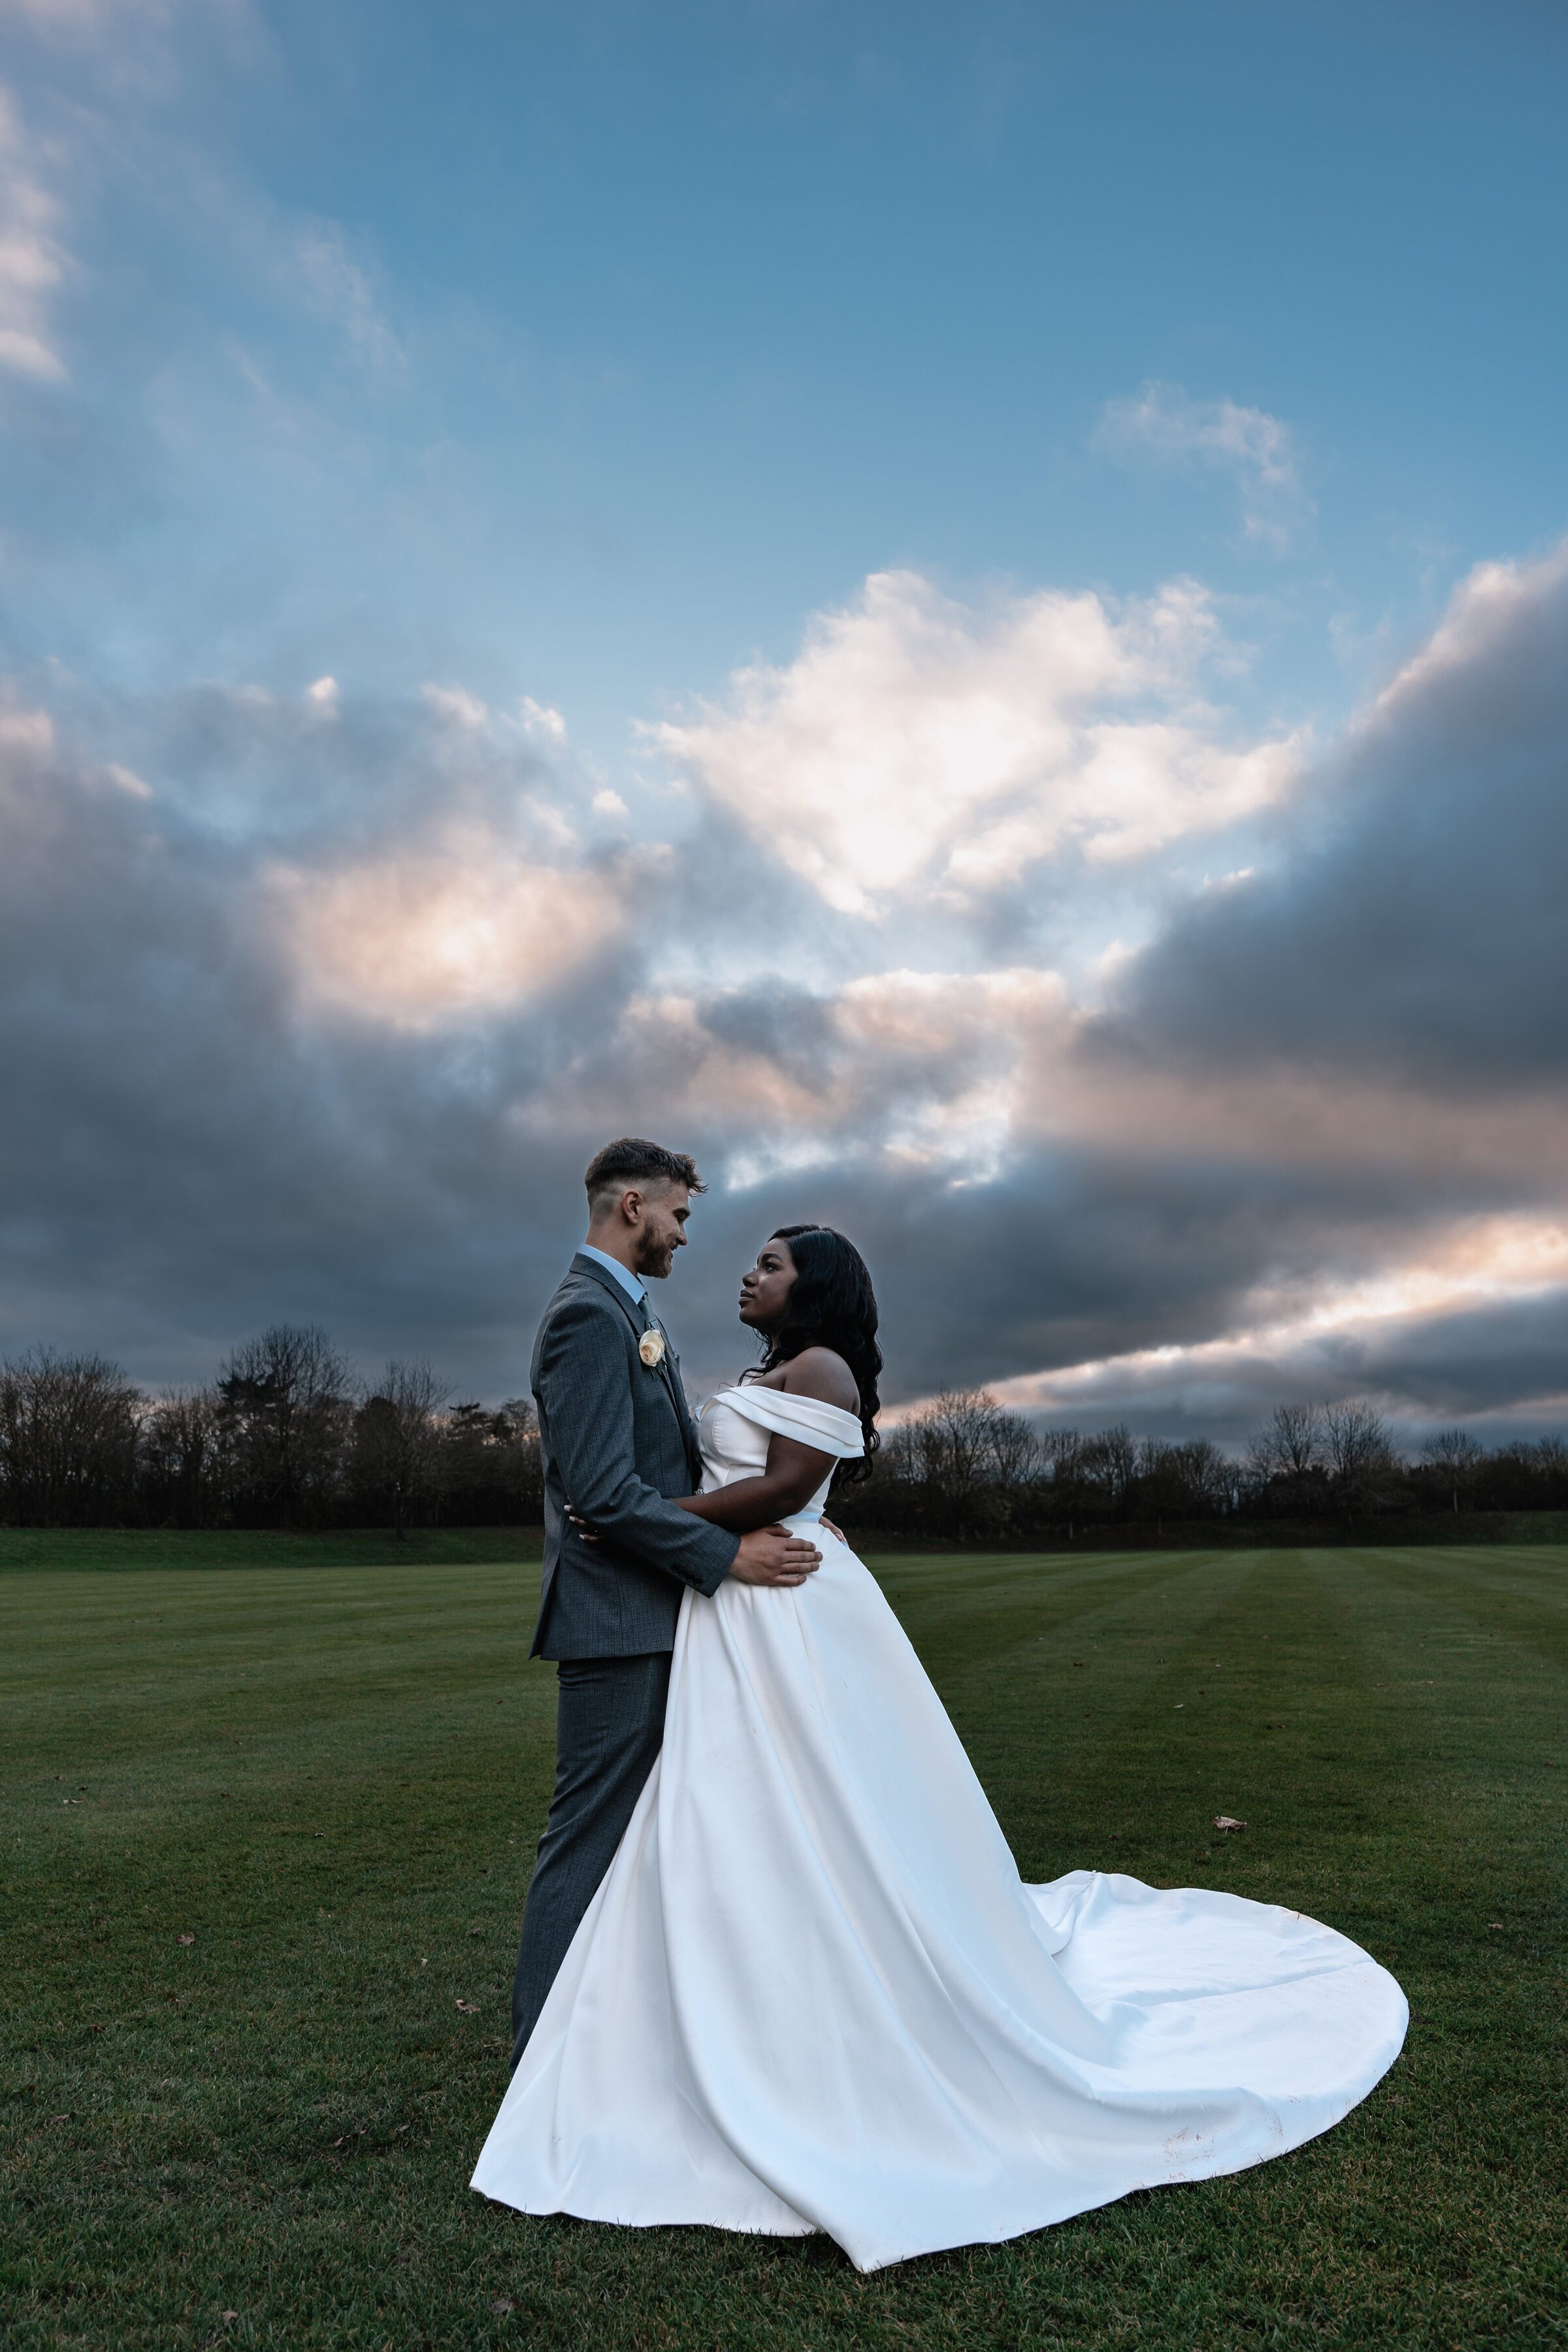 Bride and Groom in wedding attire stood close together in a field with a moody sunset sky behind them